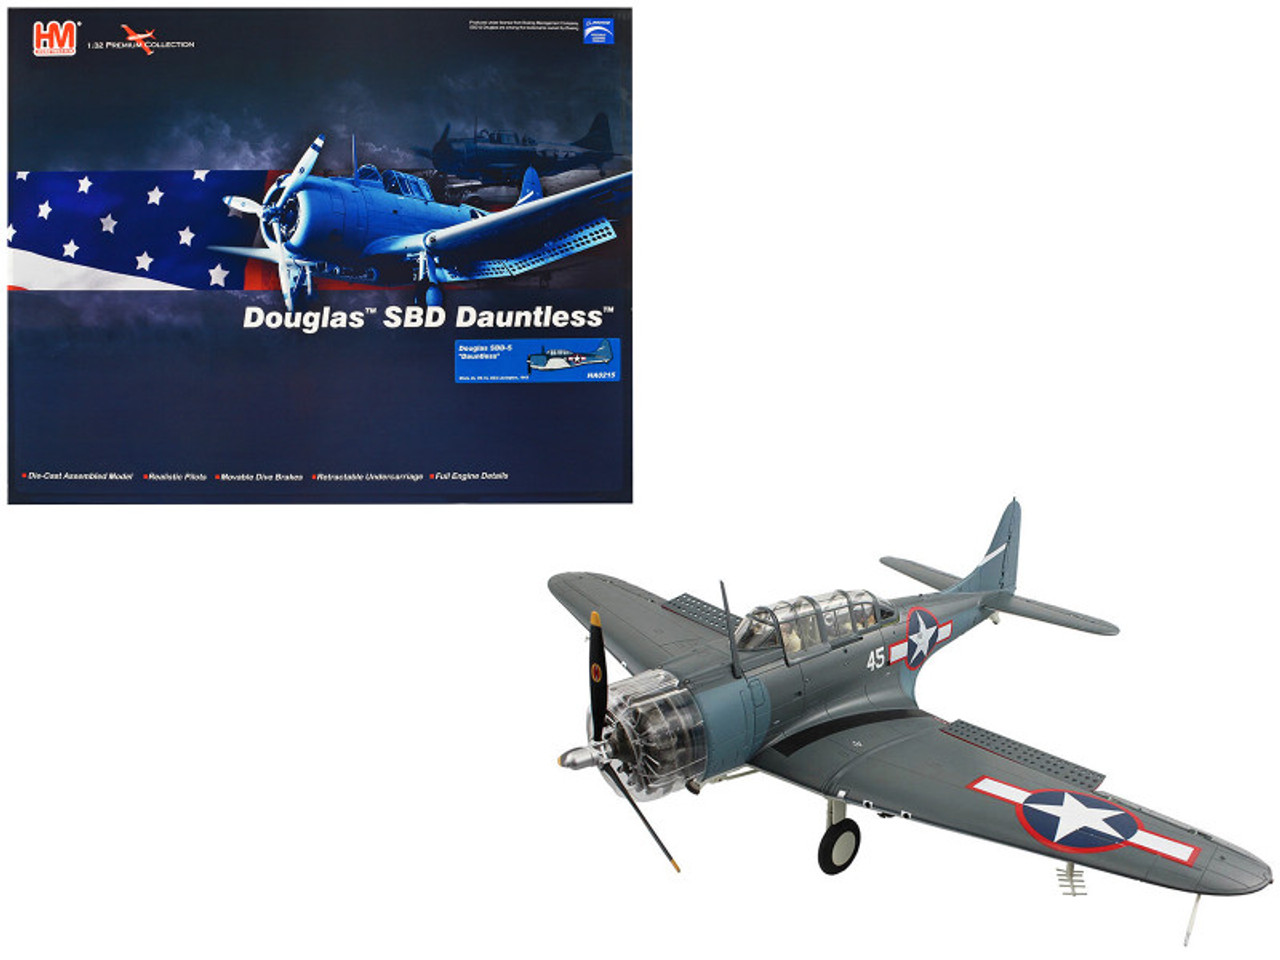 Douglas SBD-5 Dauntless Bomber Aircraft "VB-16 USS Lexington" (1943) United States Navy "Premium Collection" 1/32 Diecast Model by Hobby Master